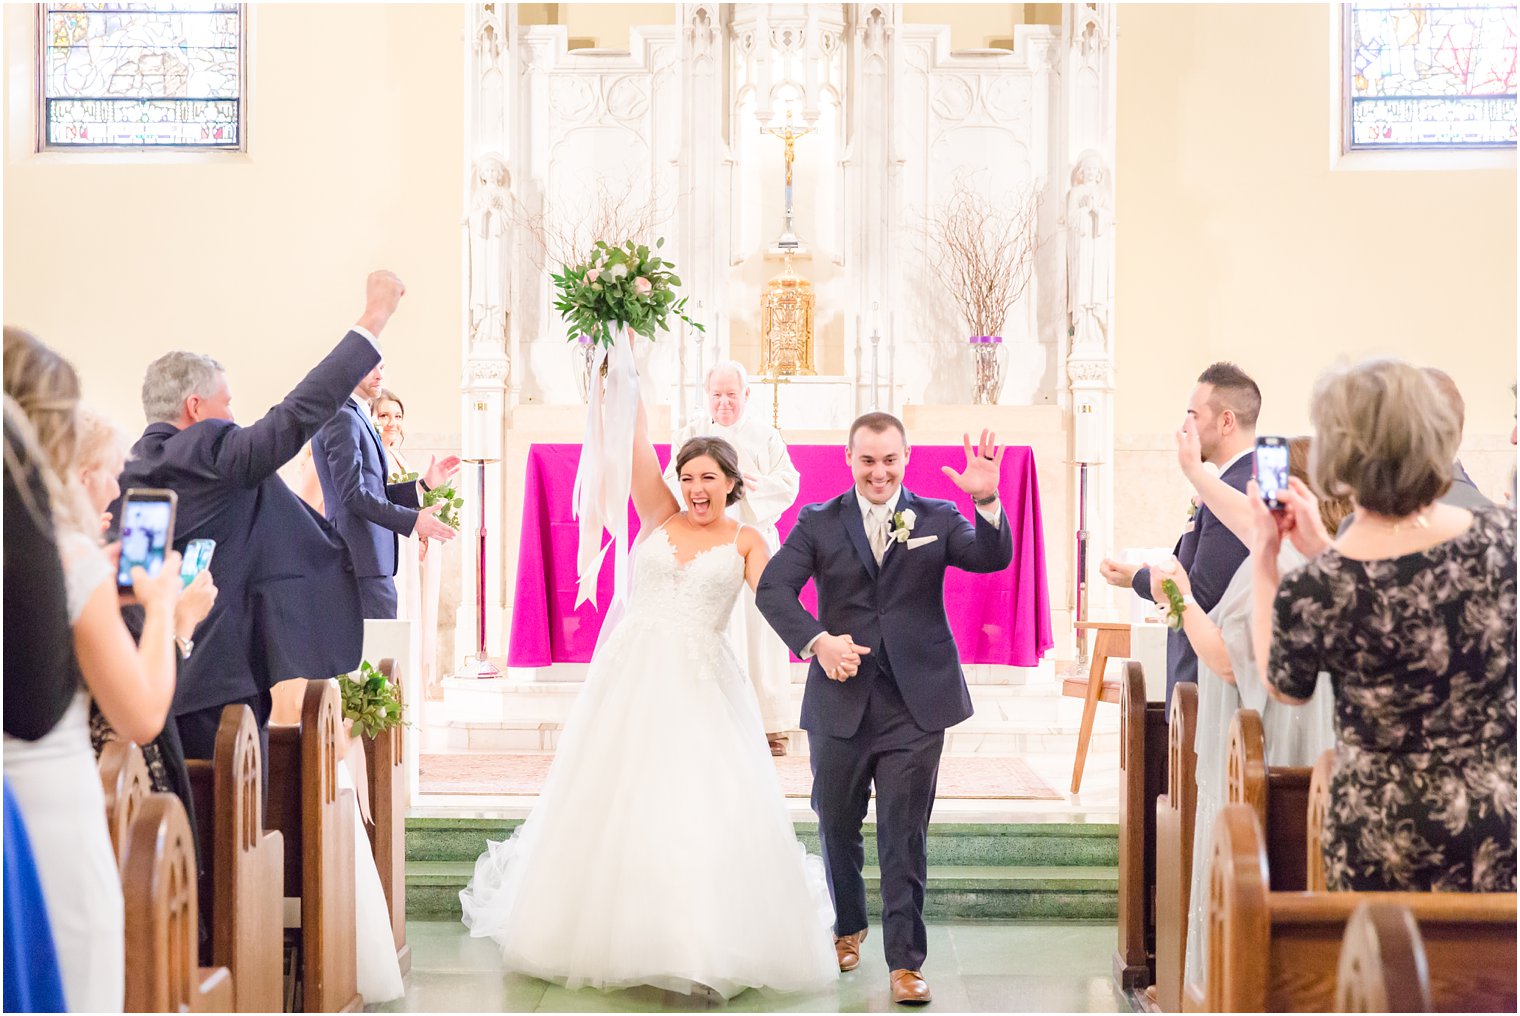 Bride and groom recessional at St. Rose